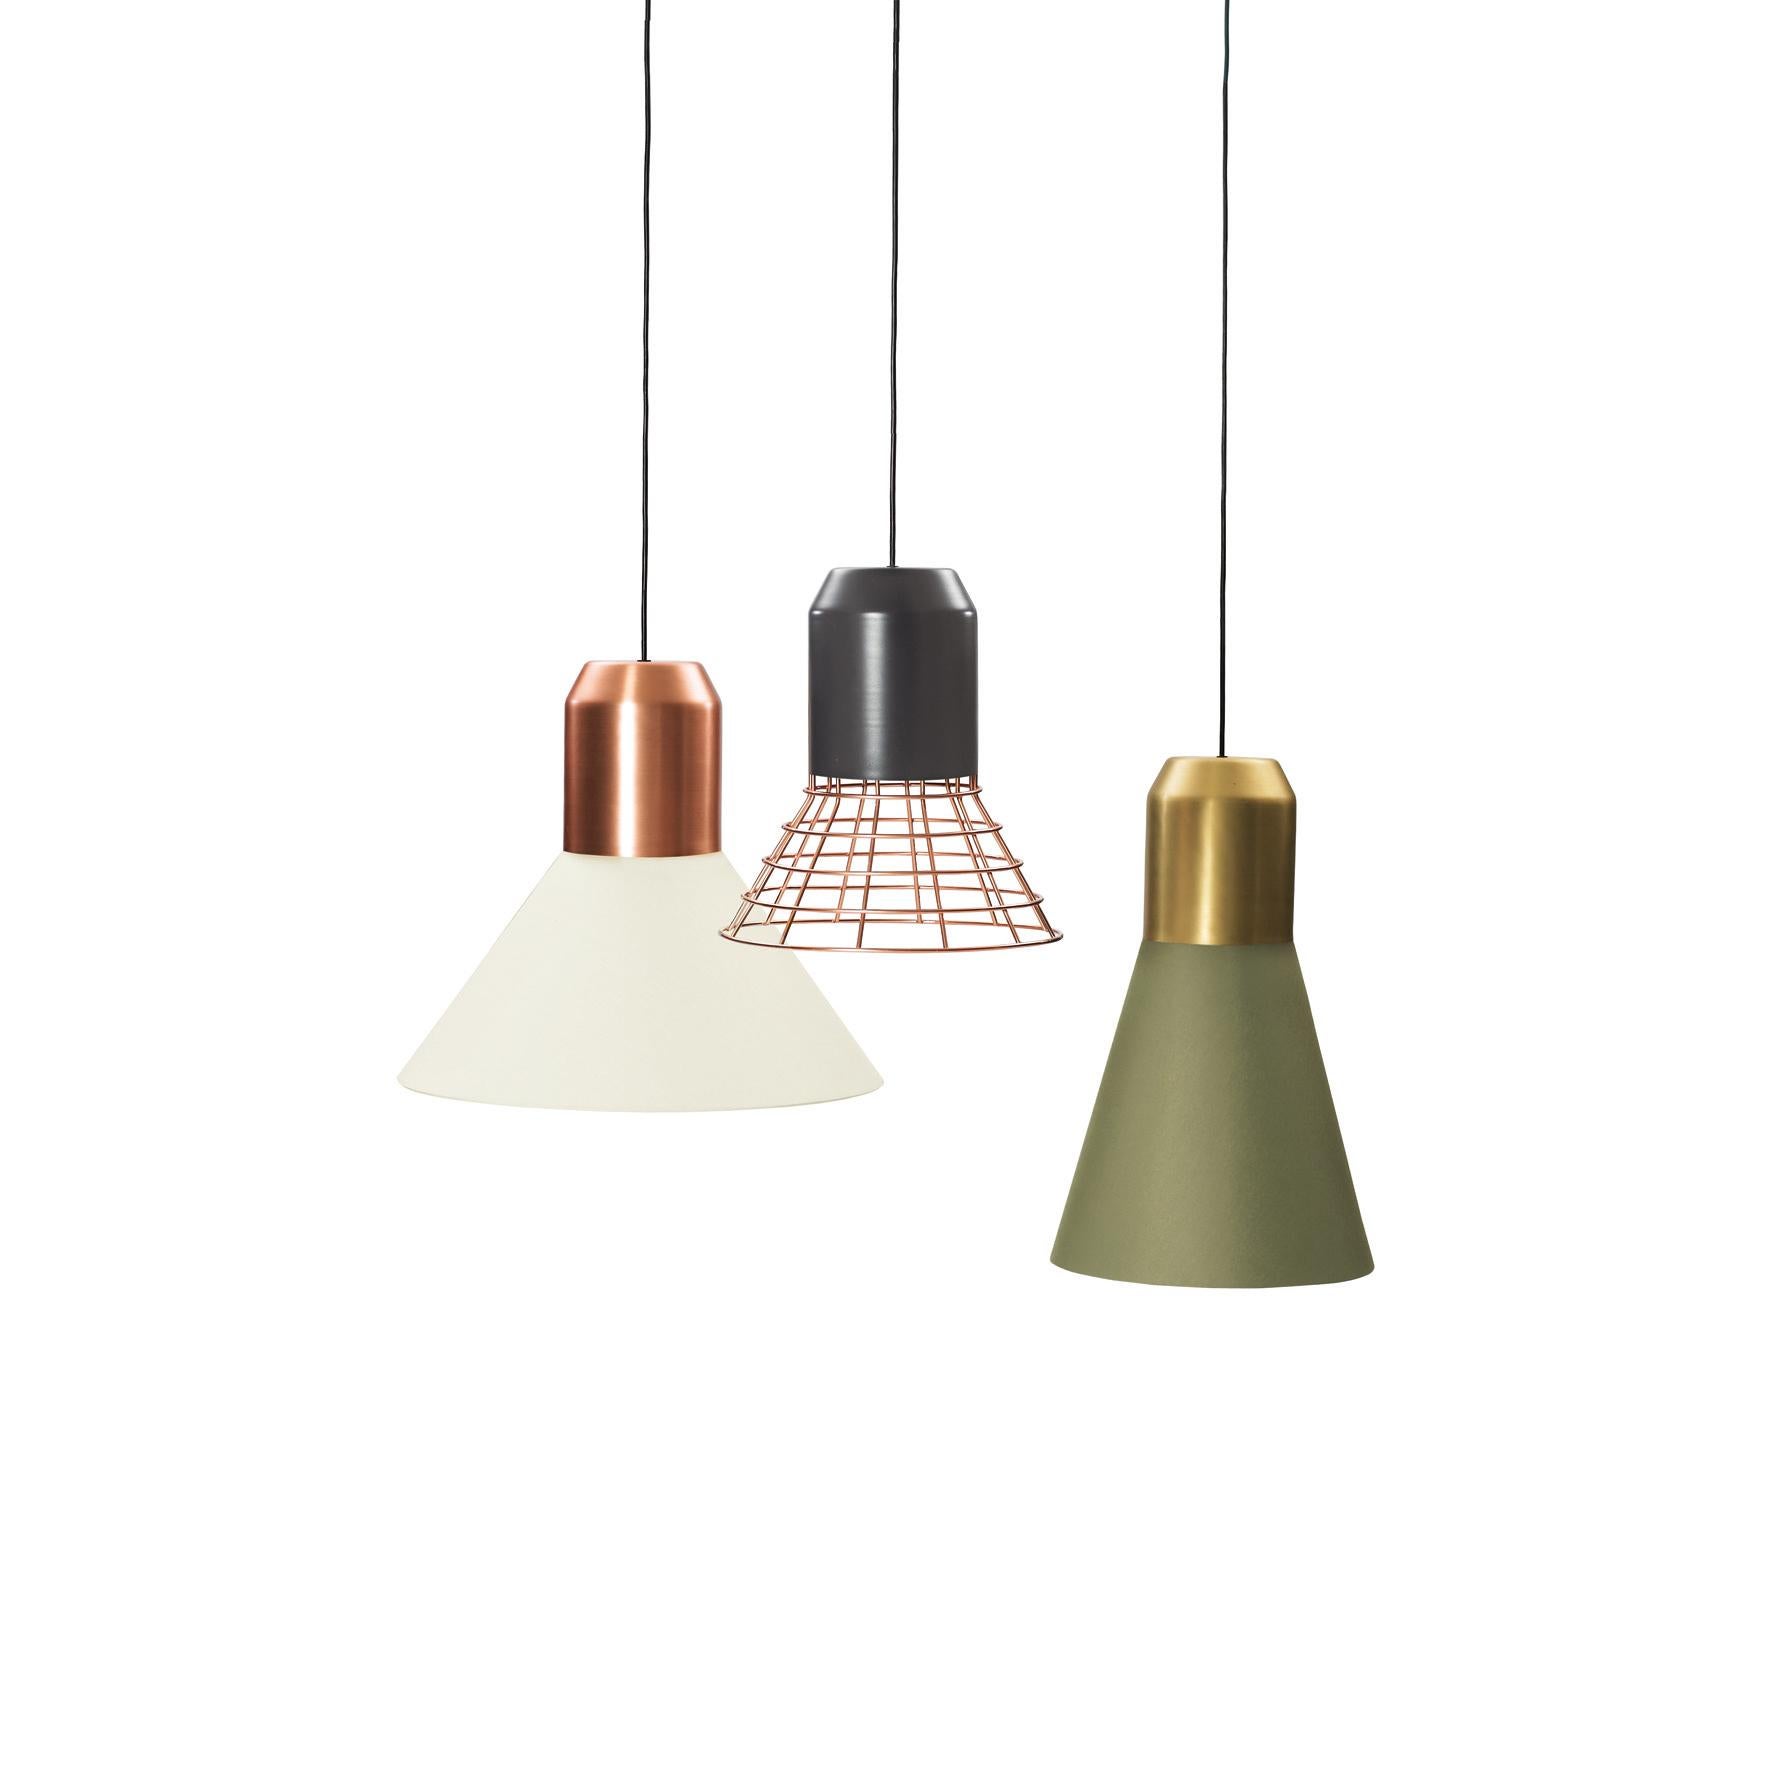 Sebastian Herkner’s bell lights reveal their adaptability and flexibility at the very first glance. Each of the lampshades in this family of pendant lamps can be combined with a choice of sleek cylindrical bulb sockets in grey, brass or copper and